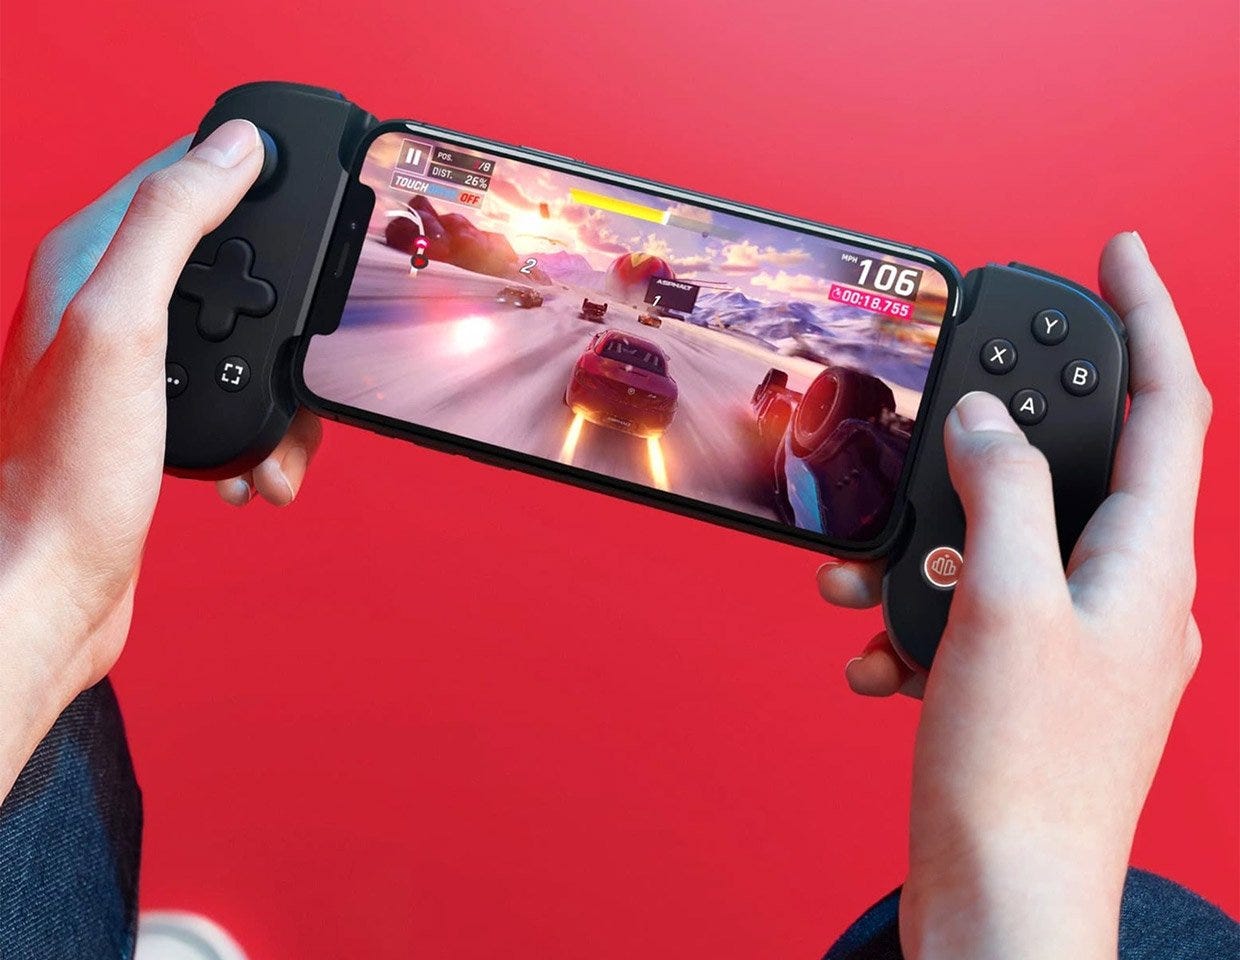 Backbone Mobile Game Controller Turns iPhones Into a Serious Gaming Handheld